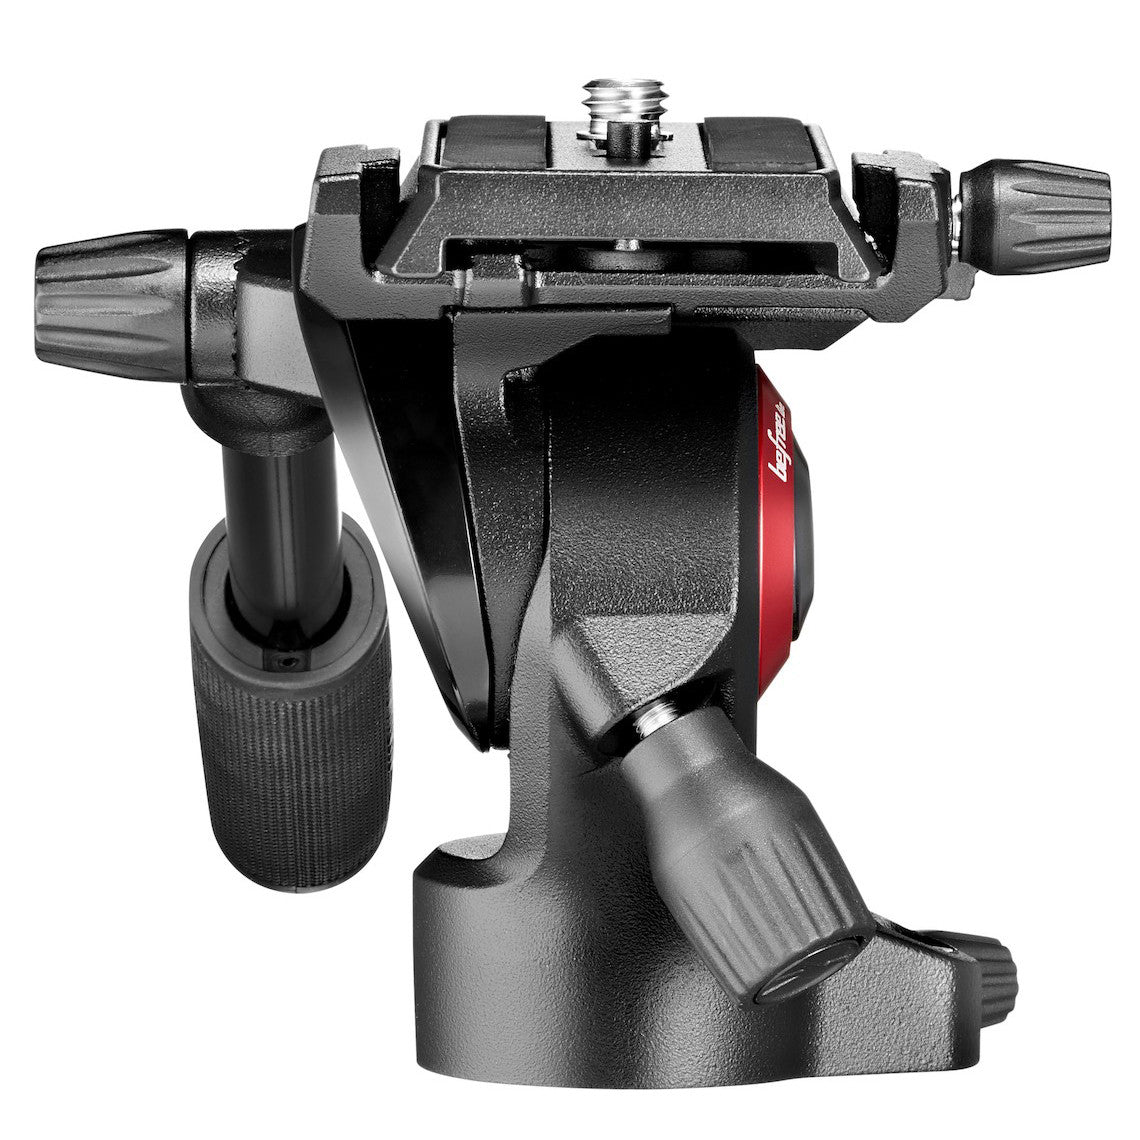 Manfrotto Befree Live Fluid Head in Manfrotto Befree Live Fluid Head - goHUNT Shop by GOHUNT | Manfrotto - GOHUNT Shop